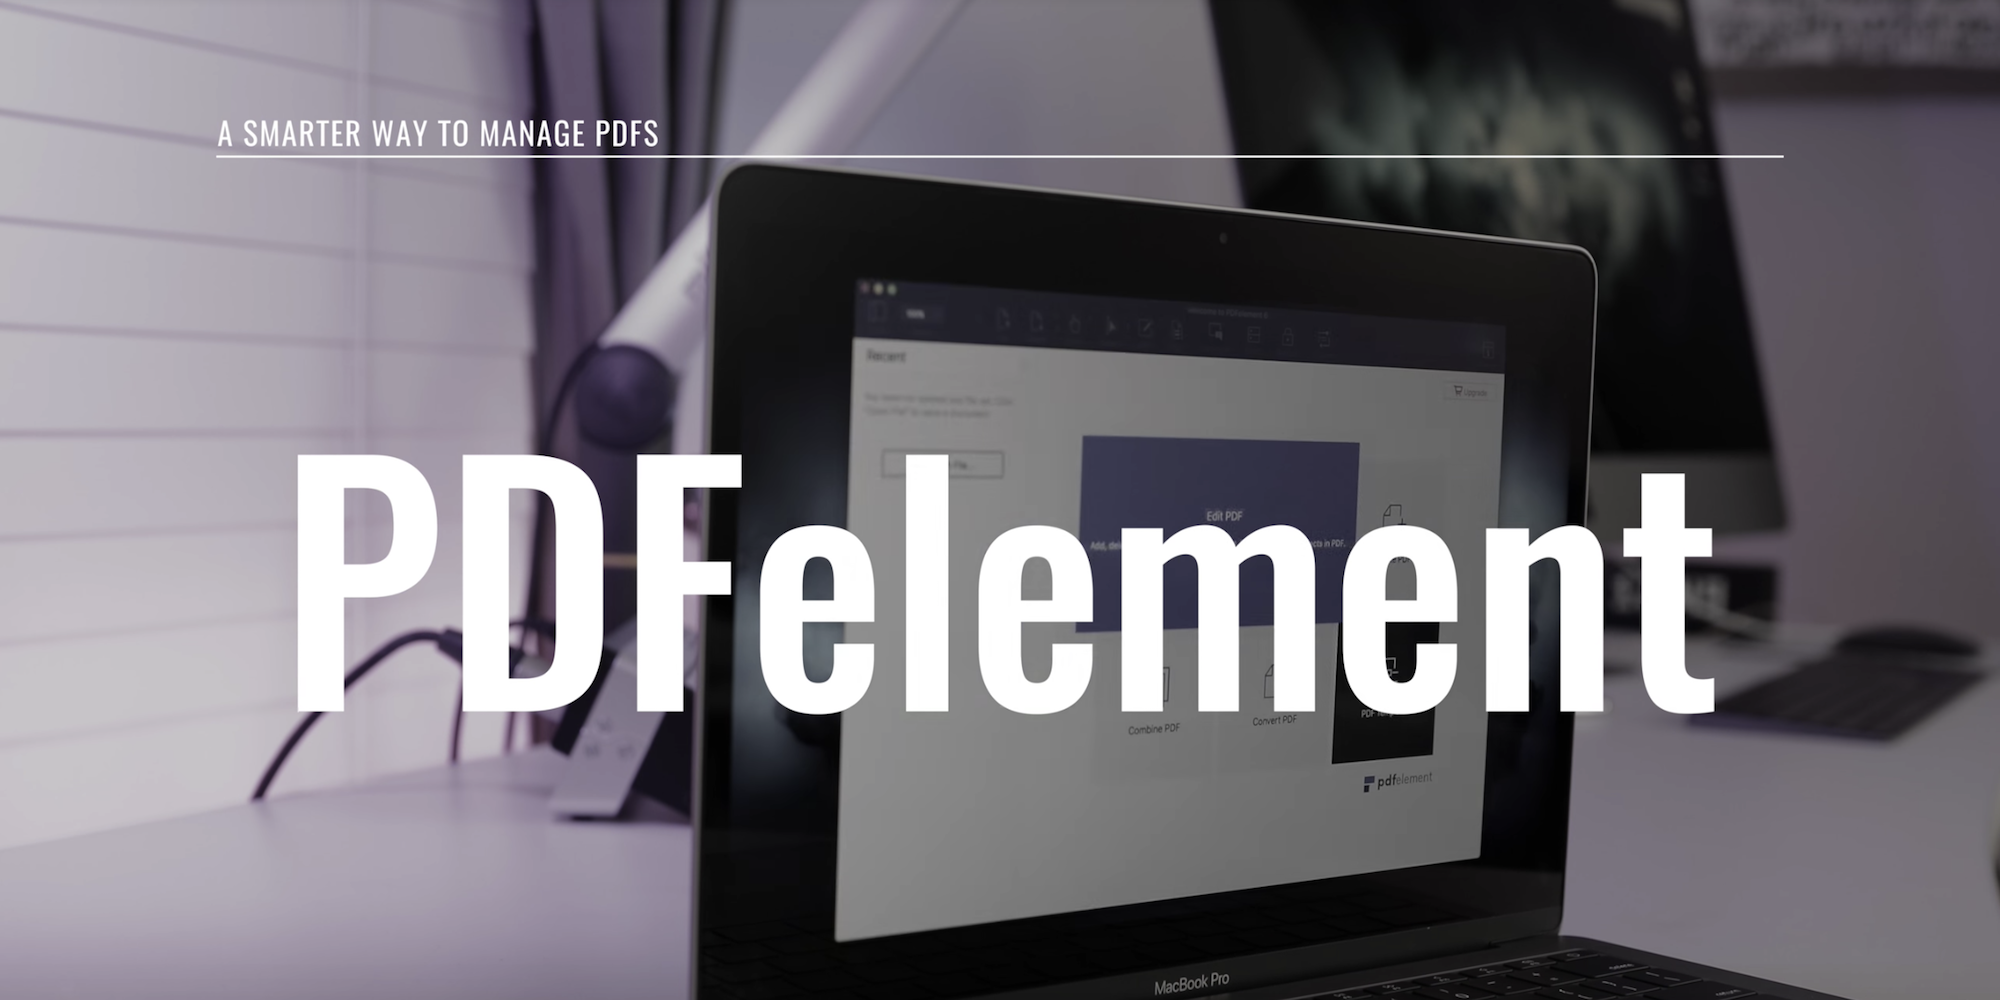 pdfelement 6 pro with